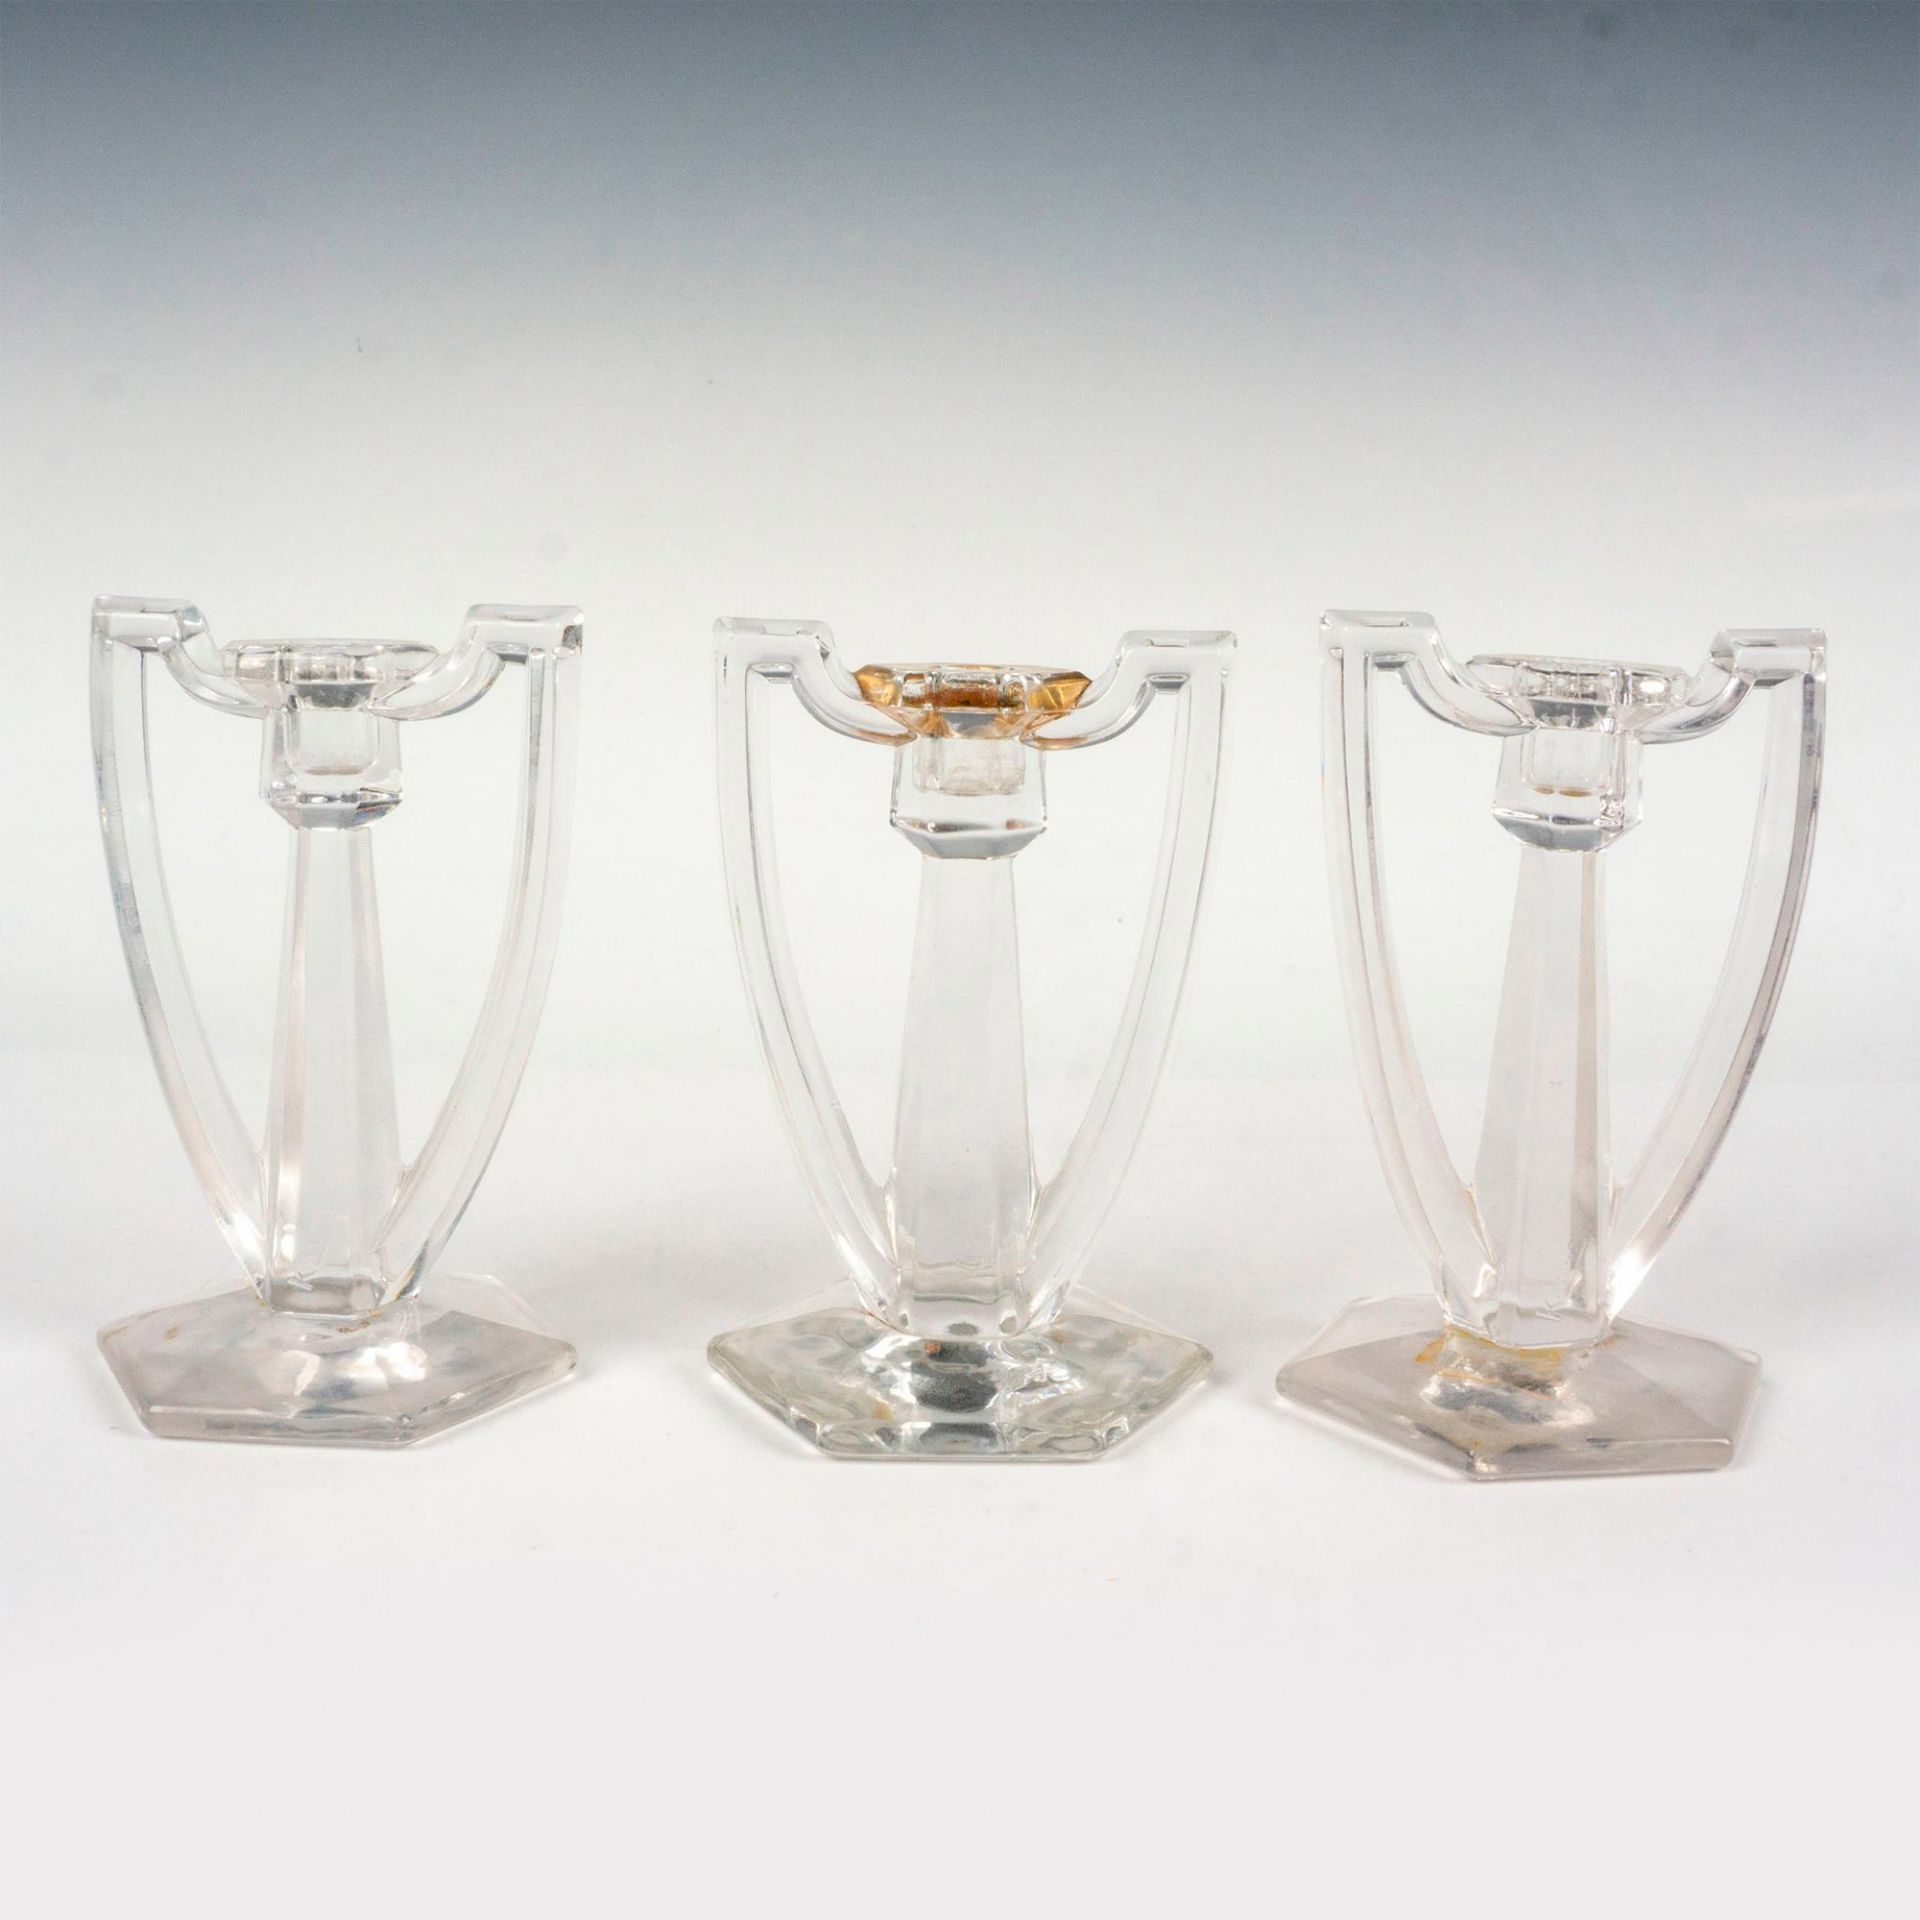 3pc Central Glass Works Single Candlestick Holders, Krystol